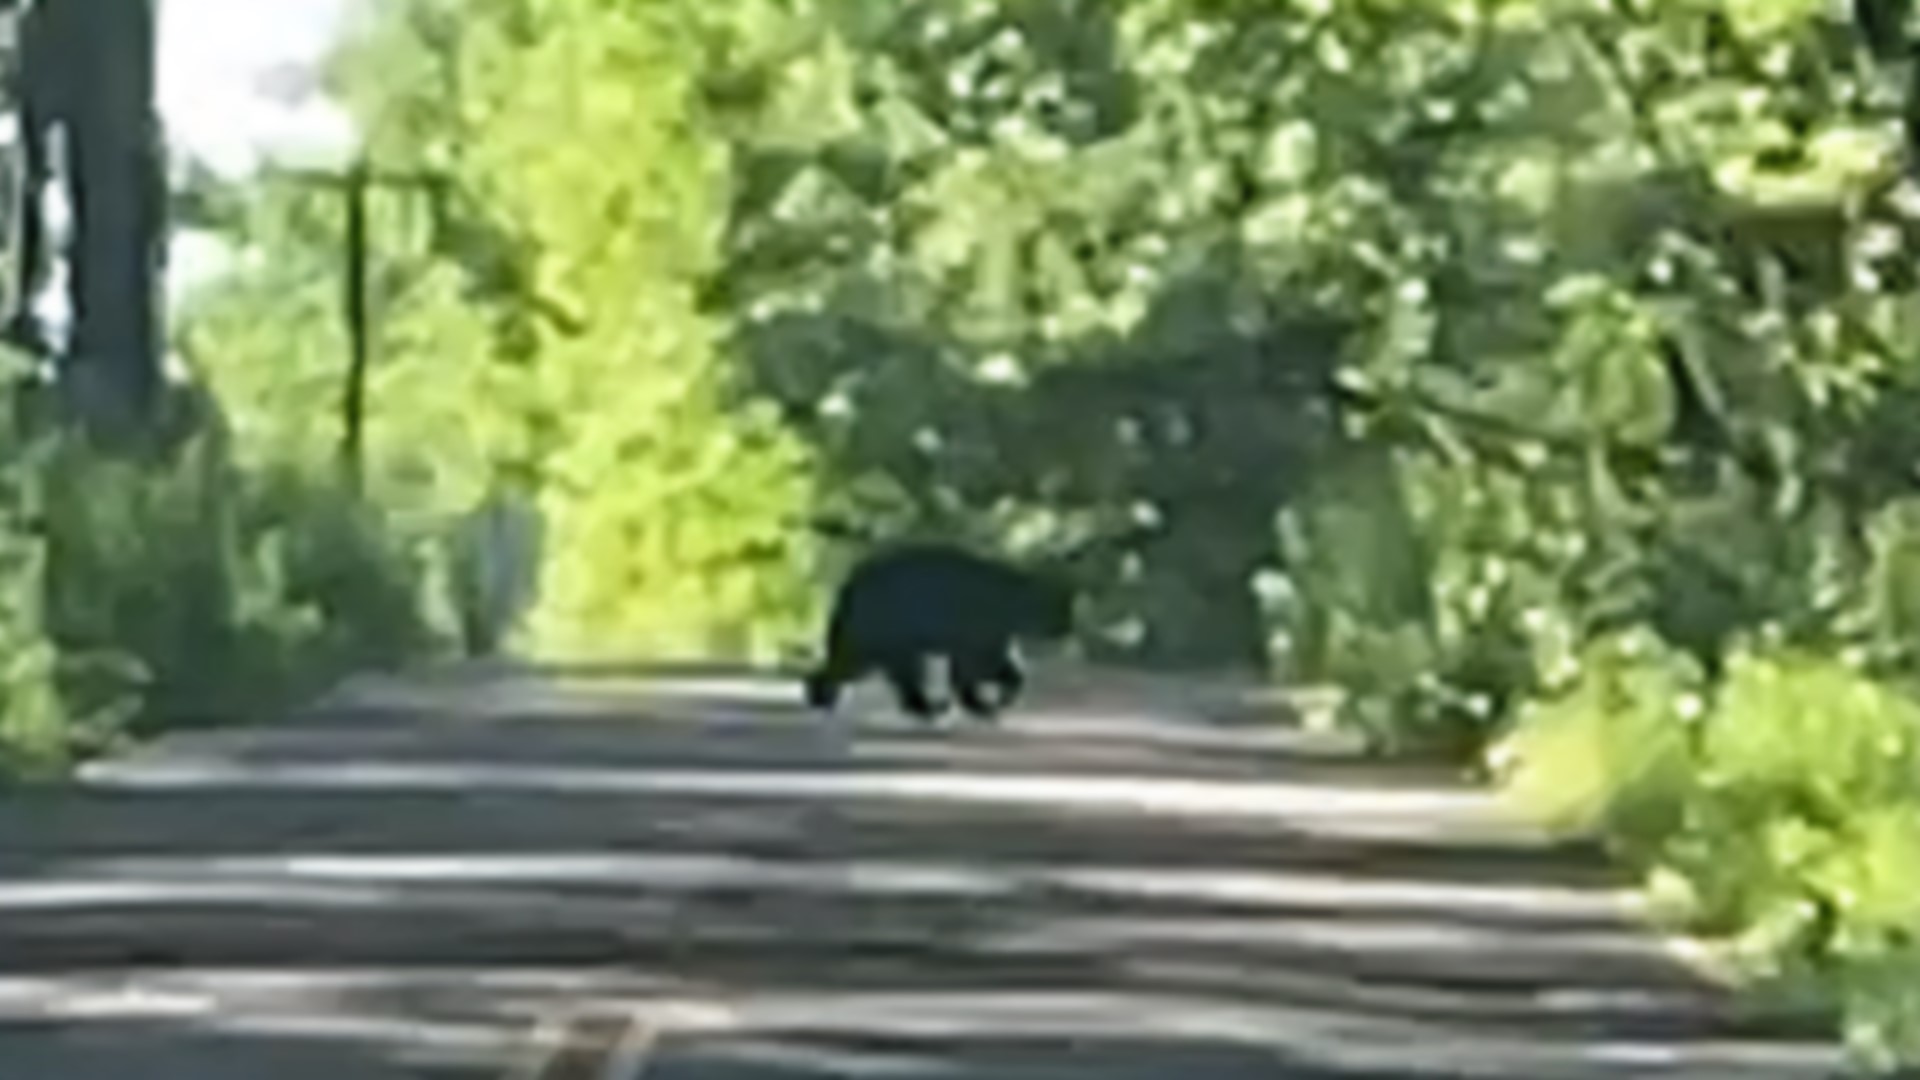 Portland Parks & Recreation is installing warning signs in Forest Park after multiple black bear sightings were reported in the area this past week.